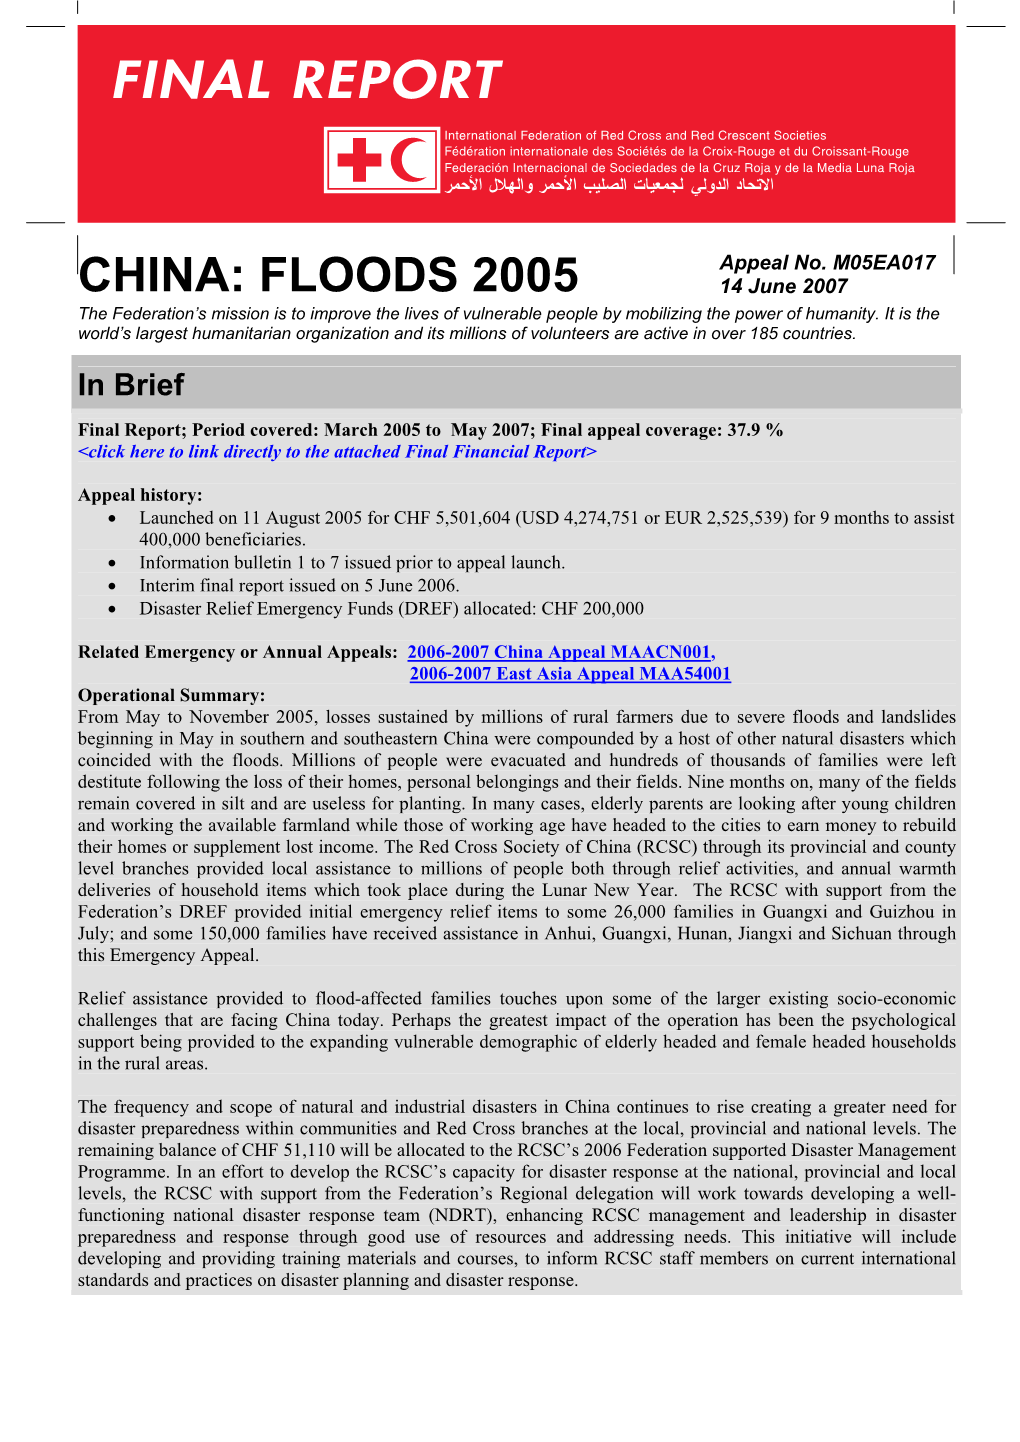 CHINA: FLOODS 2005 14 June 2007 the Federation’S Mission Is to Improve the Lives of Vulnerable People by Mobilizing the Power of Humanity